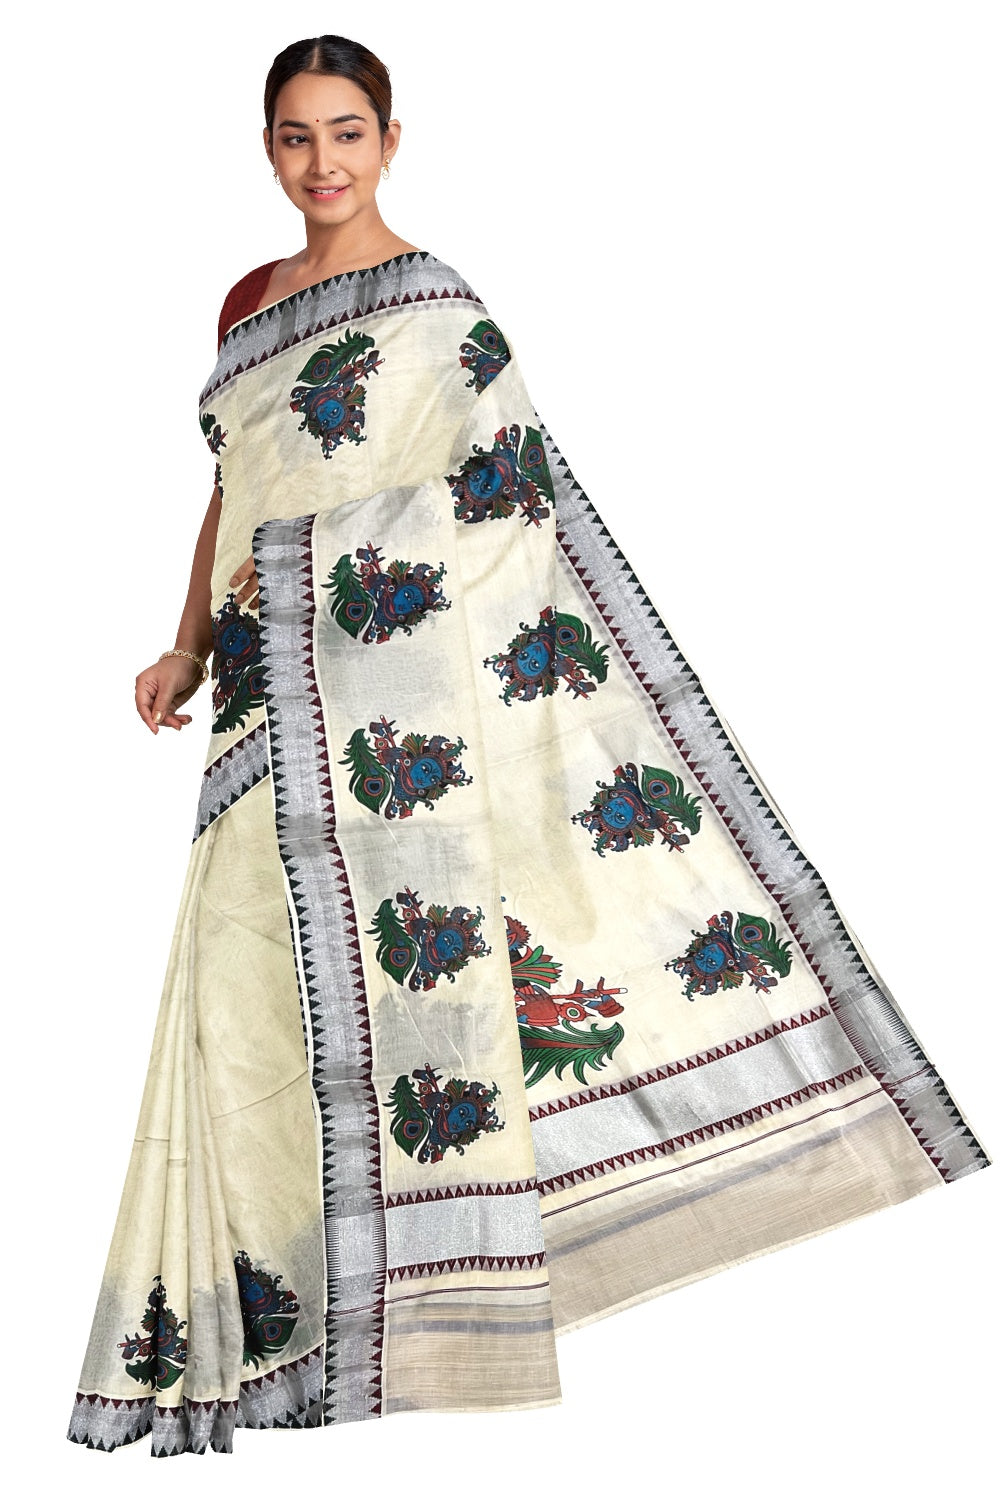 Kerala Pure Cotton Saree with Mural Printed Krishna Feather Design and Maroon Temple Border